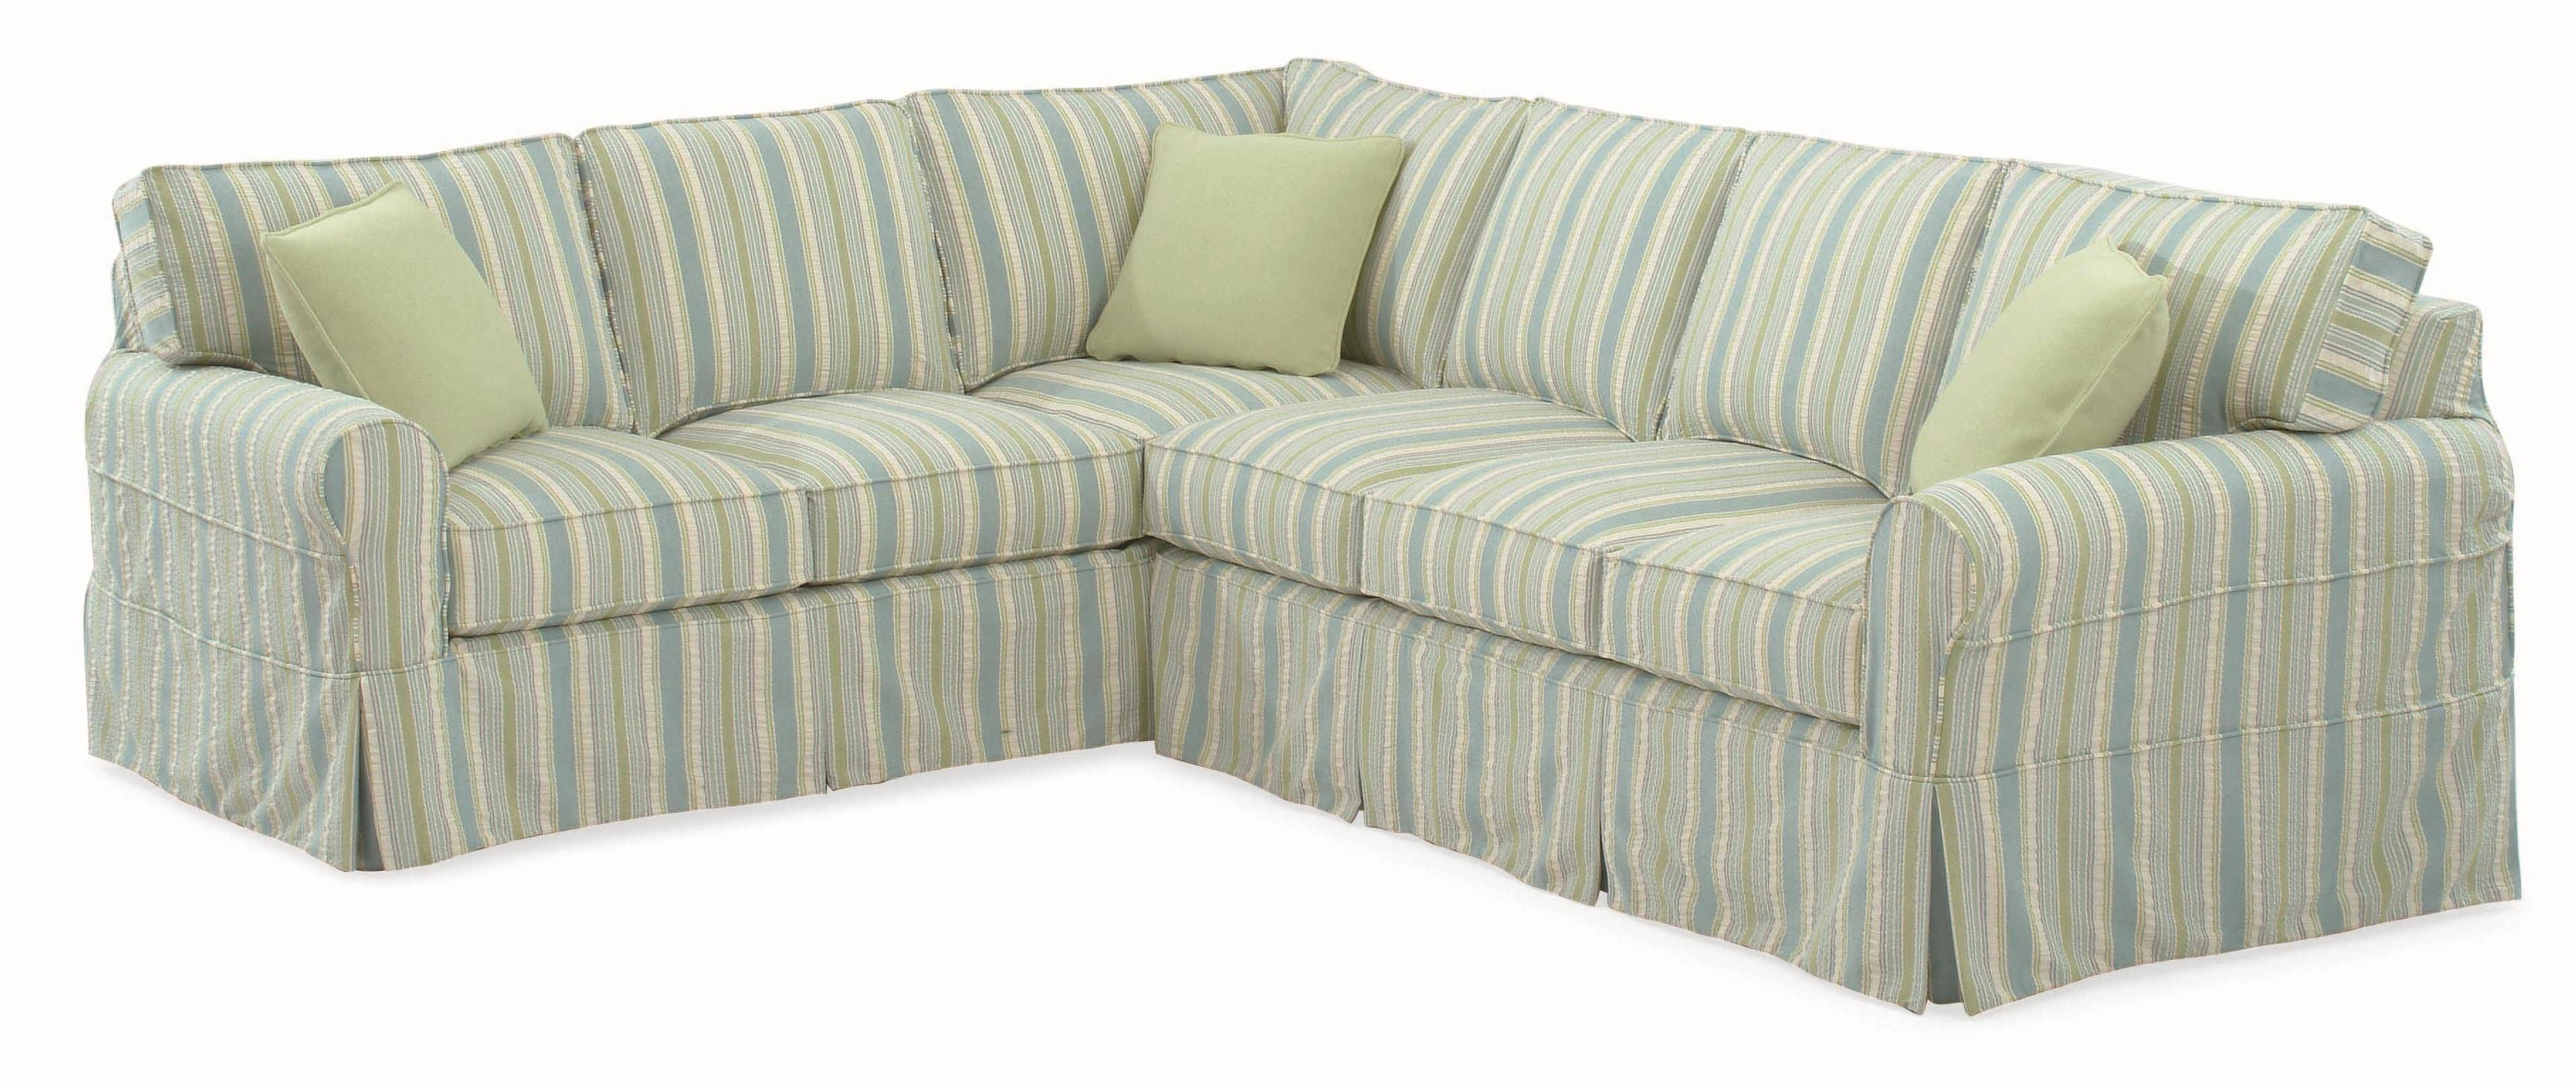 Furniture L Shaped Couch Covers Walmart Couch Covers Within Slipcovers For Sectional Sofas With Recliners 